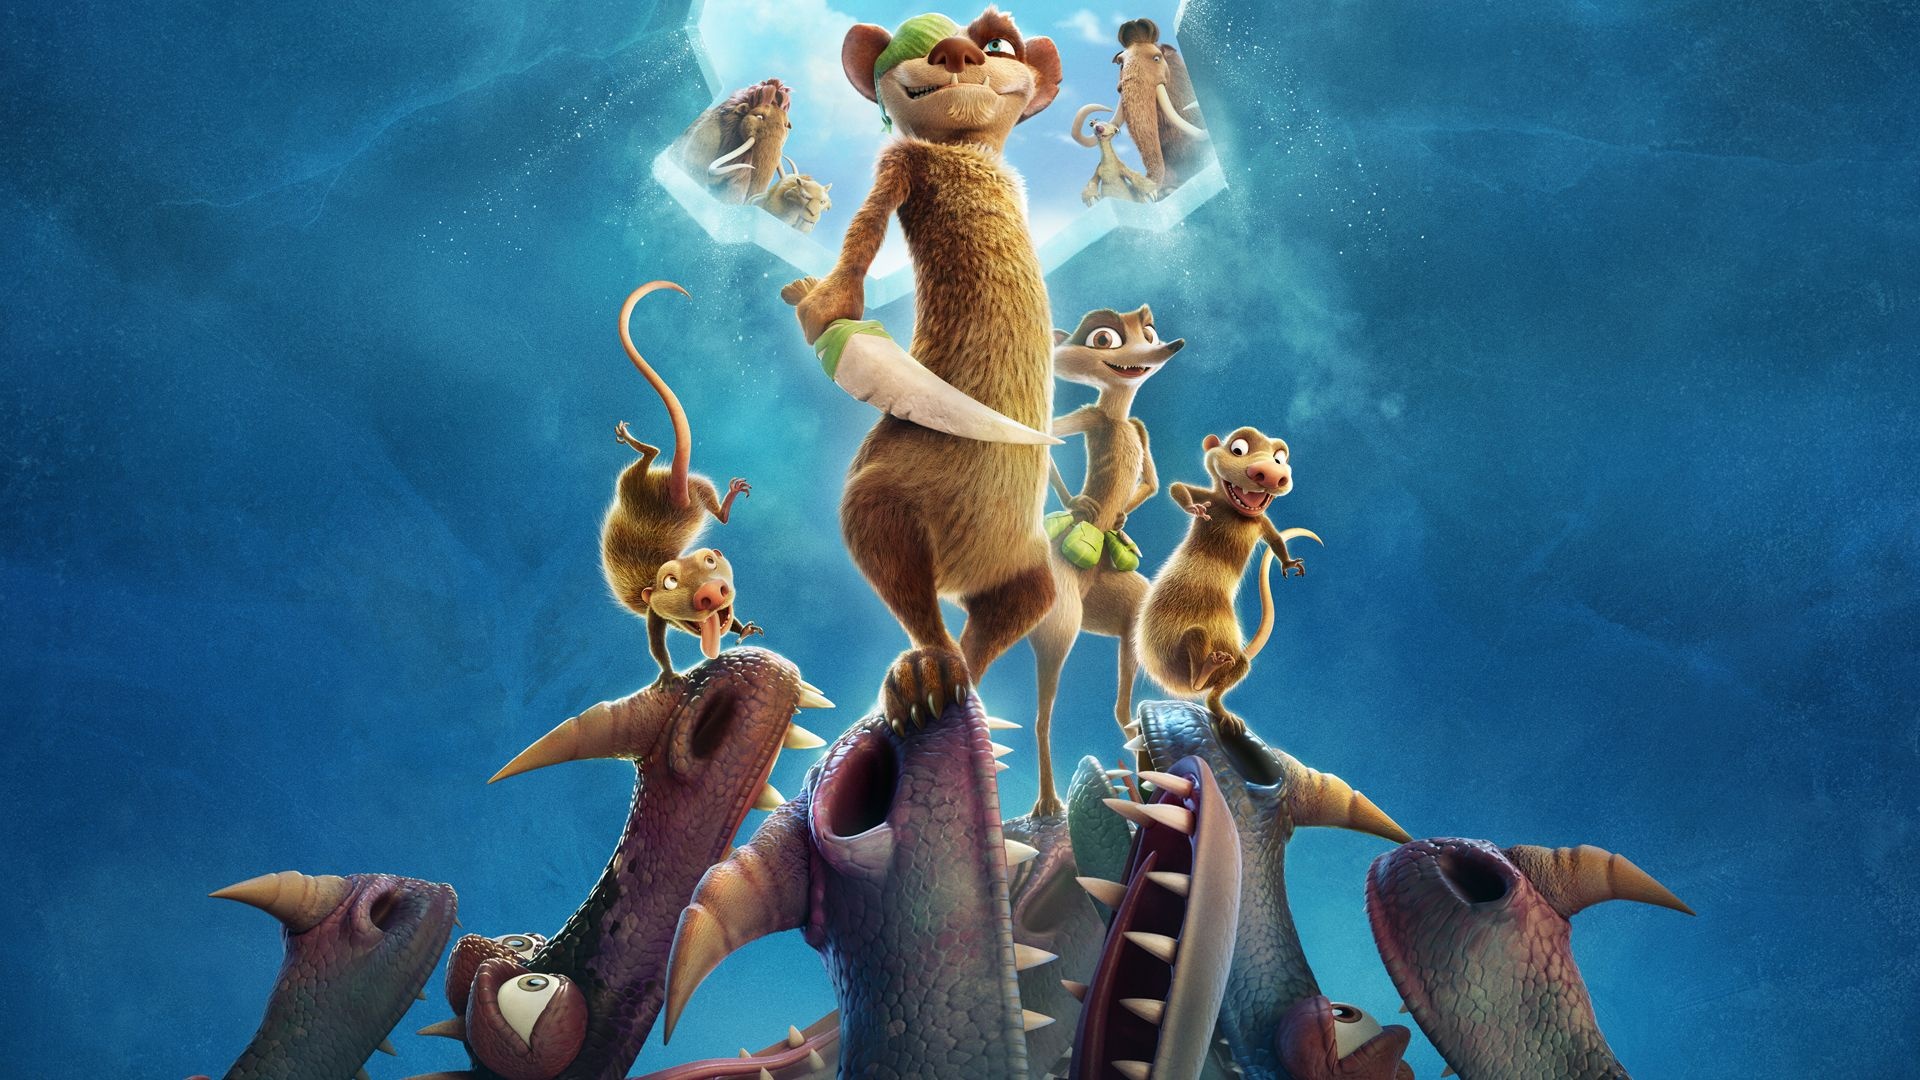 Ice Age Adventures of Buck Wild review, New Ice Age sequel, Movie analysis, Exclusive, 1920x1080 Full HD Desktop